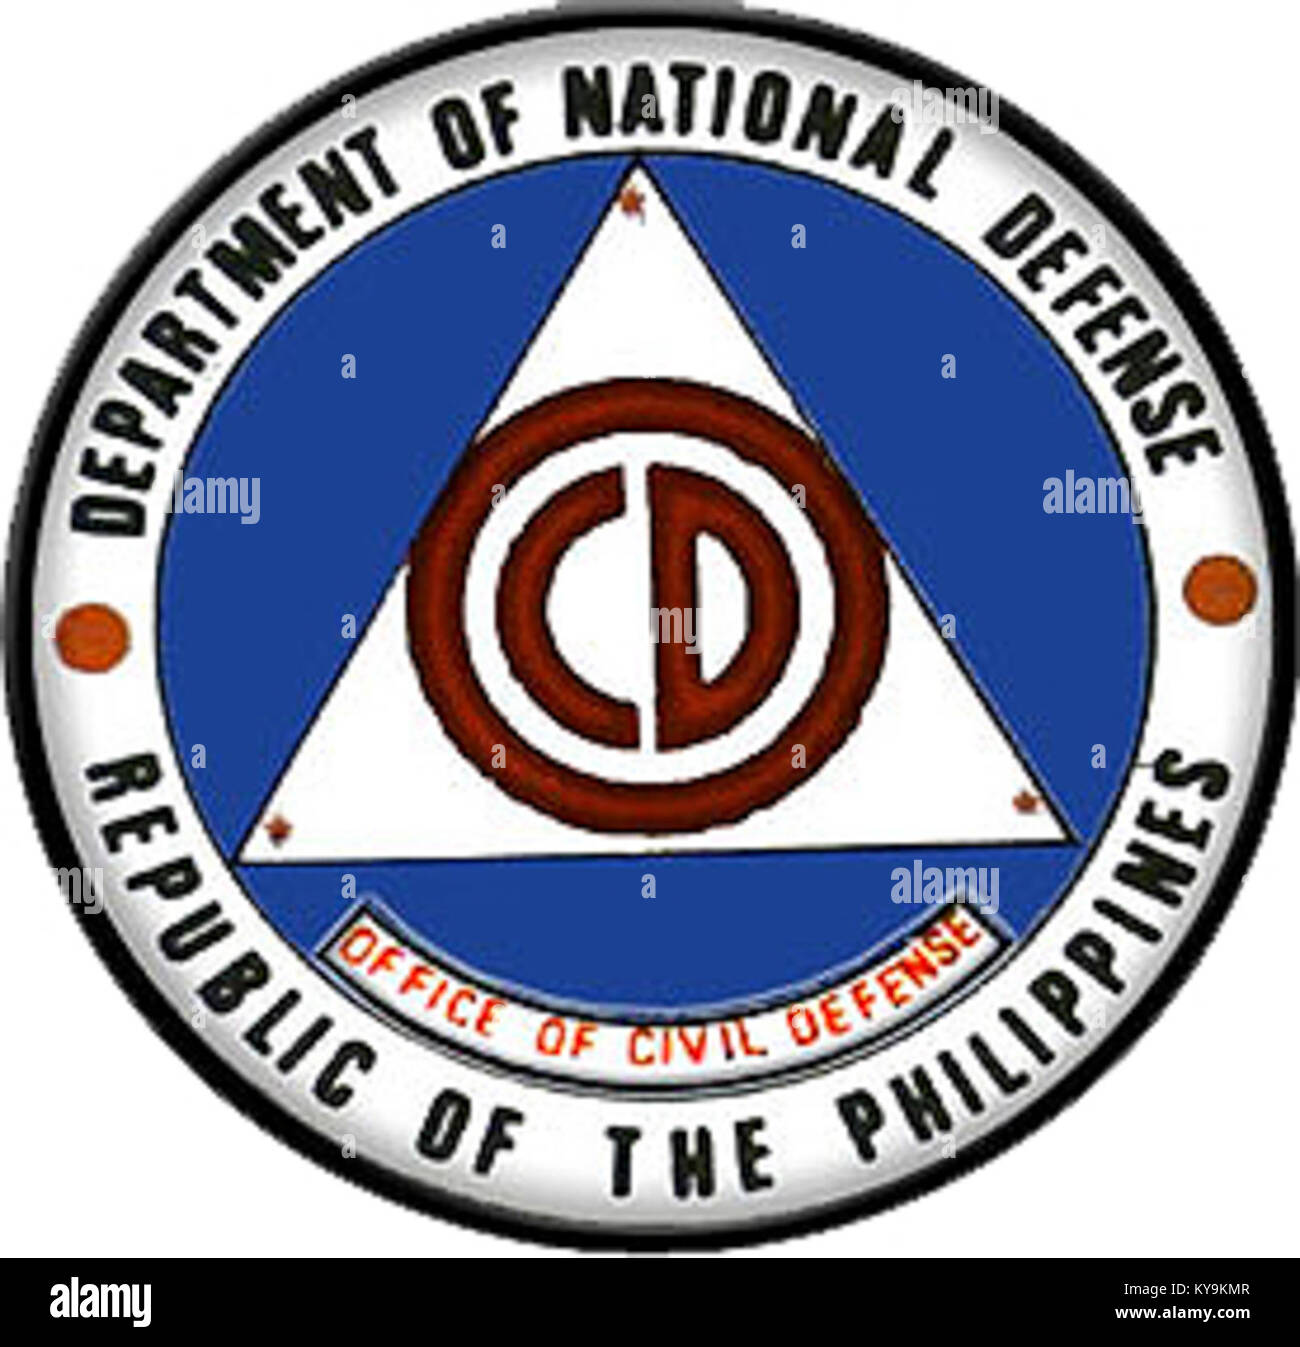 Seal of the Office of Civil Defense, Republic of the Philippines Stock Photo